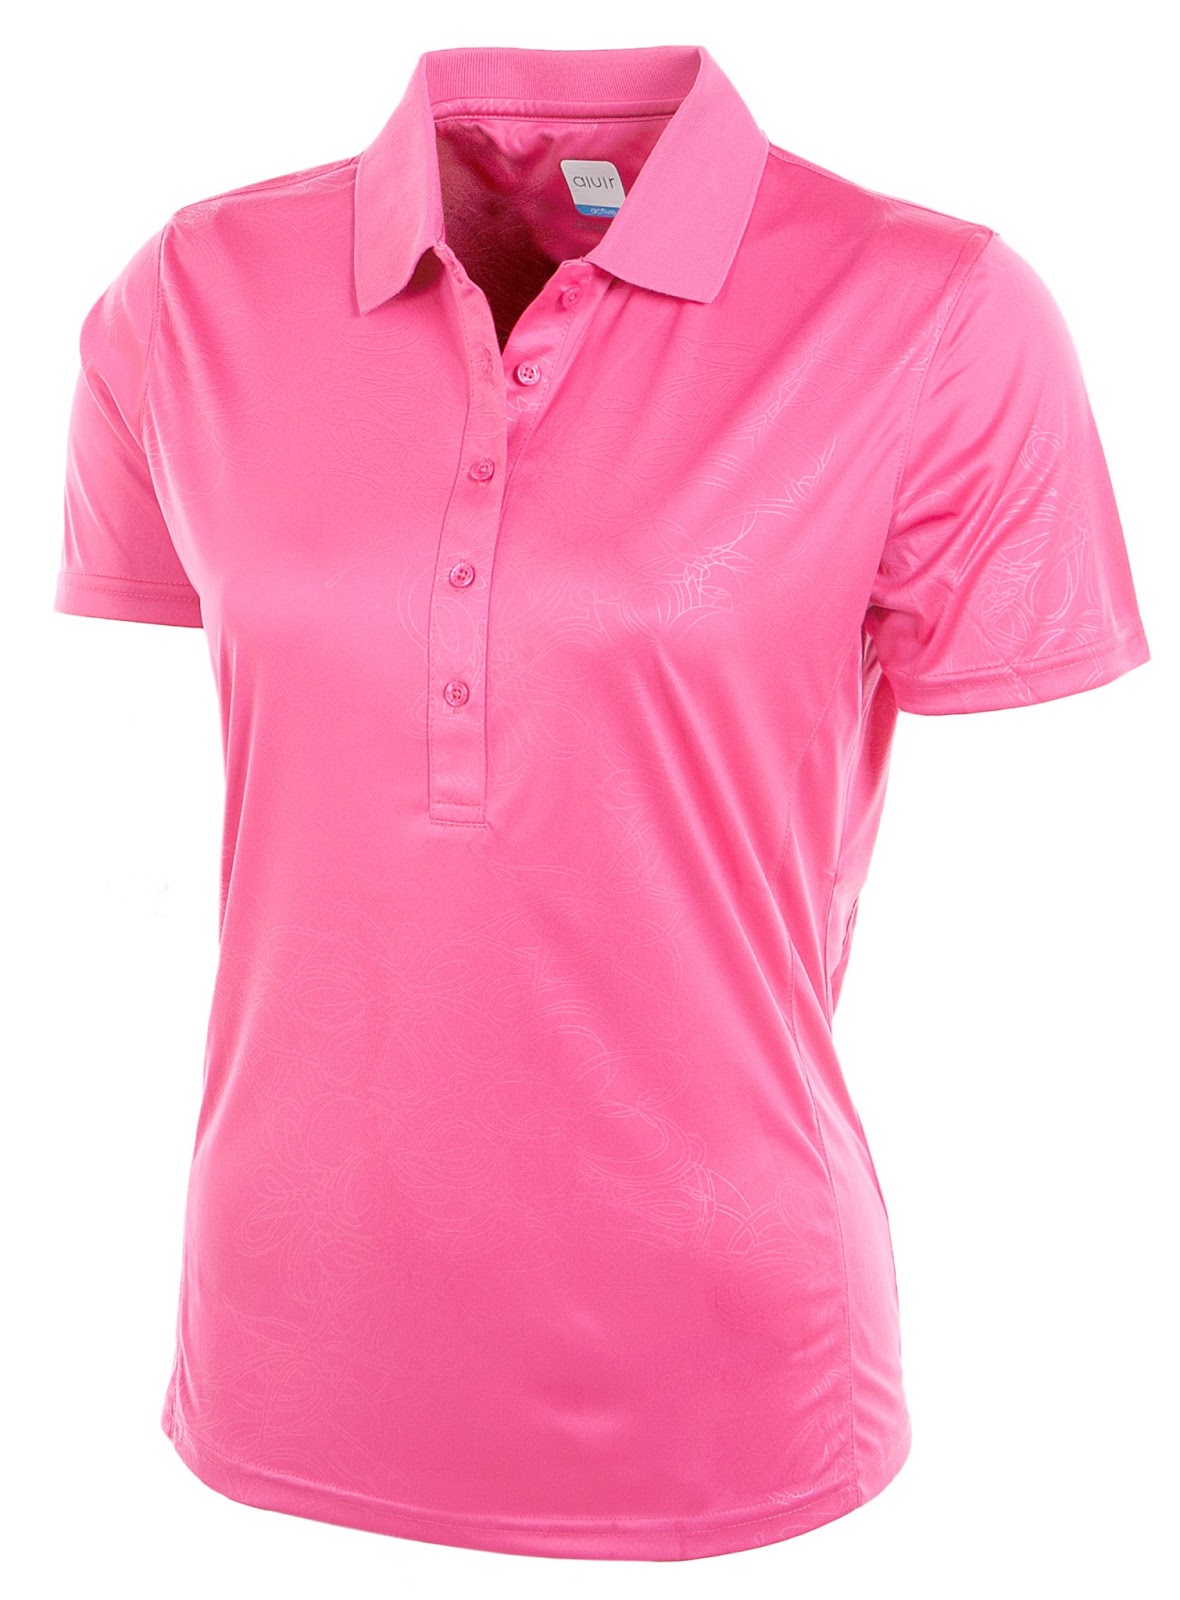 Merion Golf Club Polo Shirt - Prism Contractors & Engineers